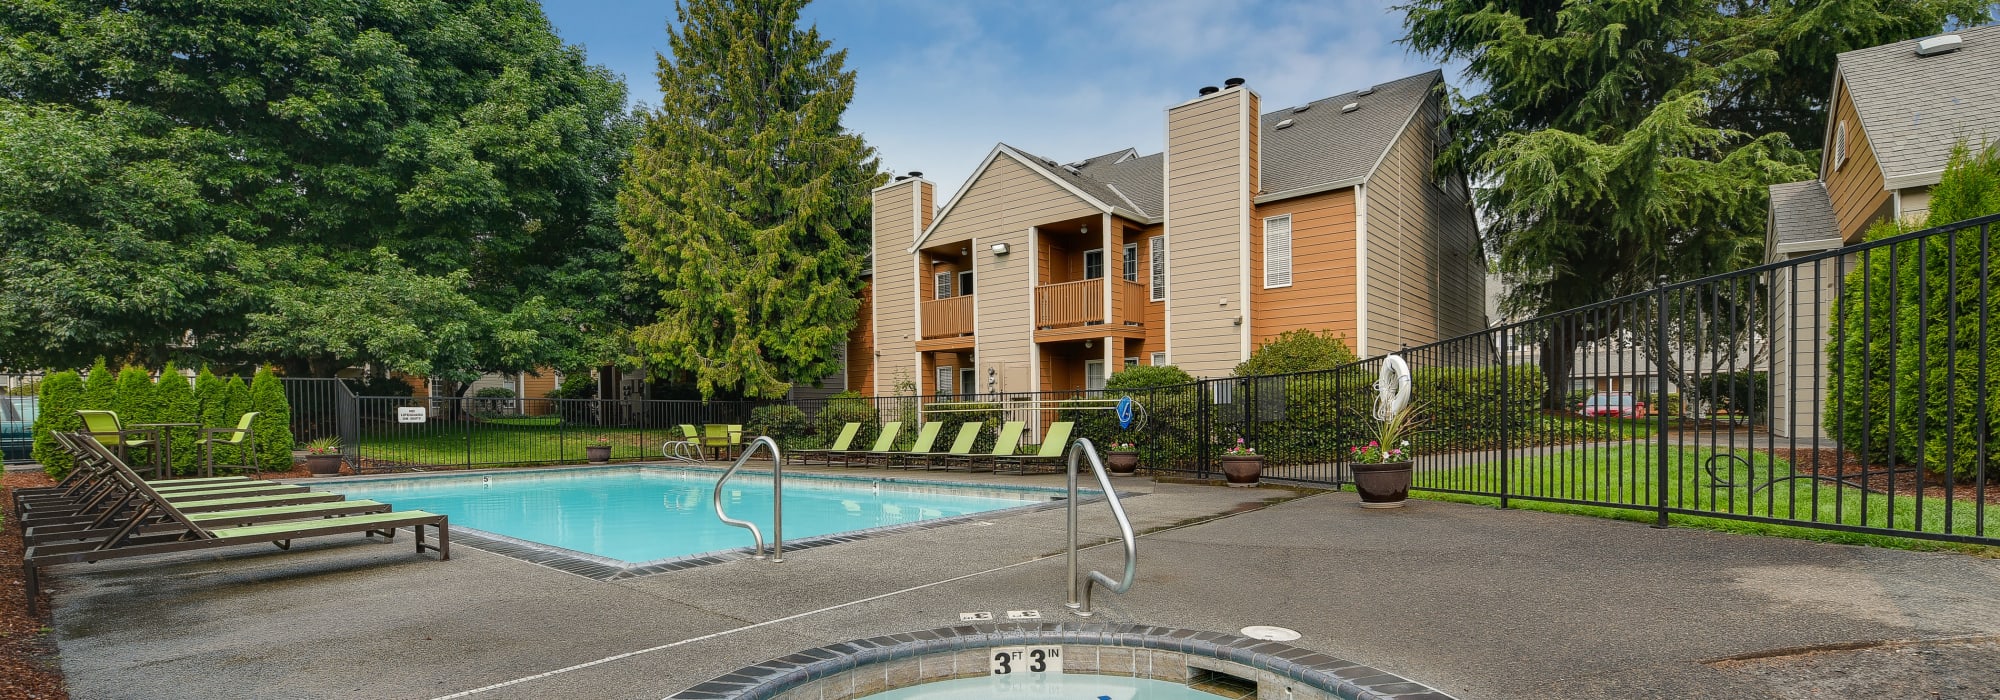 Privacy policy of Carriage House Apartments in Vancouver, Washington